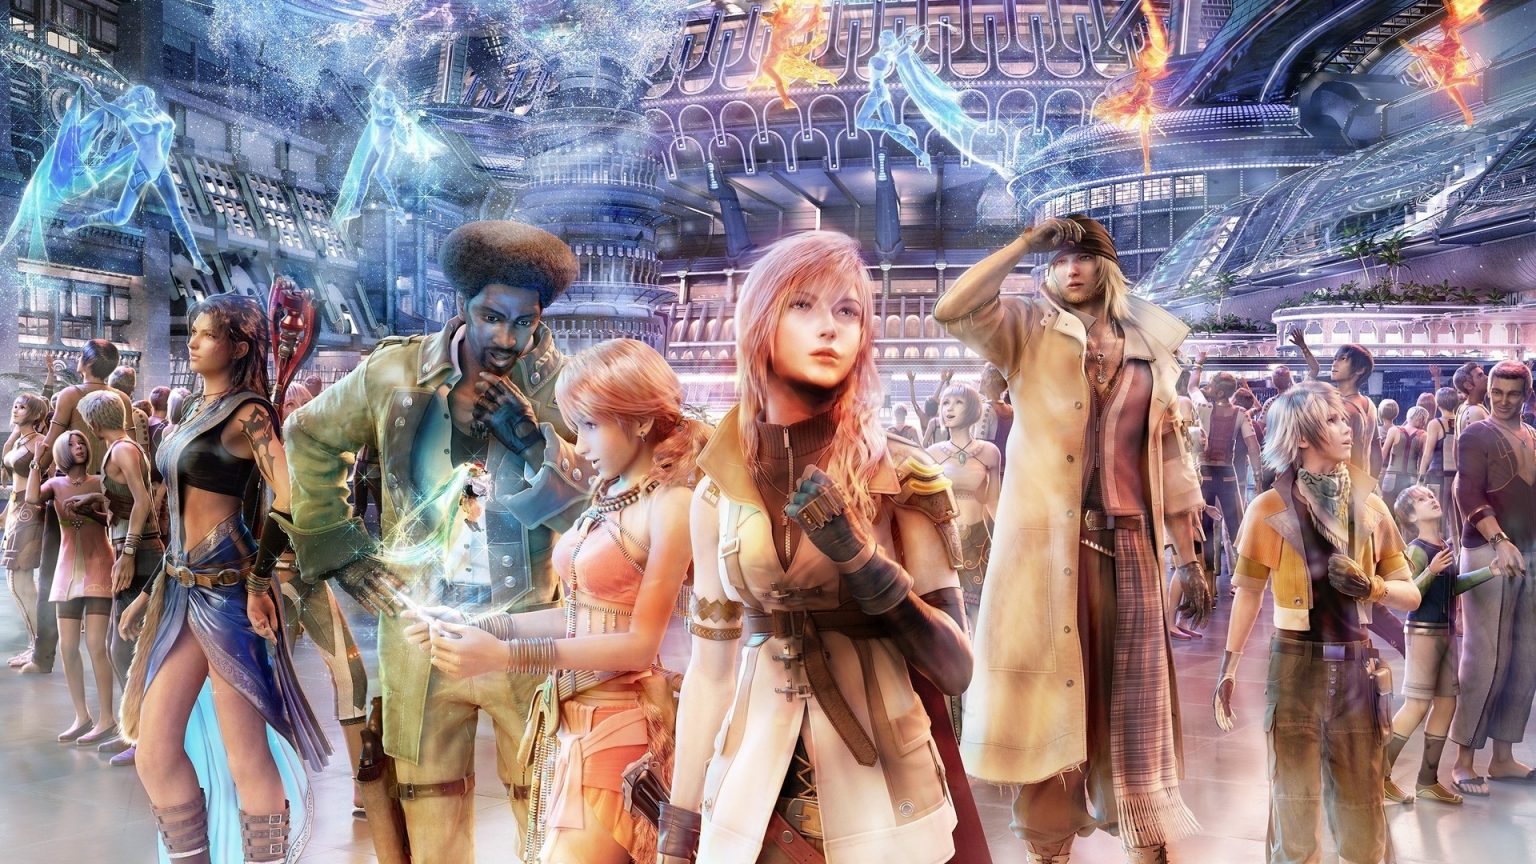 Final Fantasy Video Game for 1536 x 864 HDTV resolution